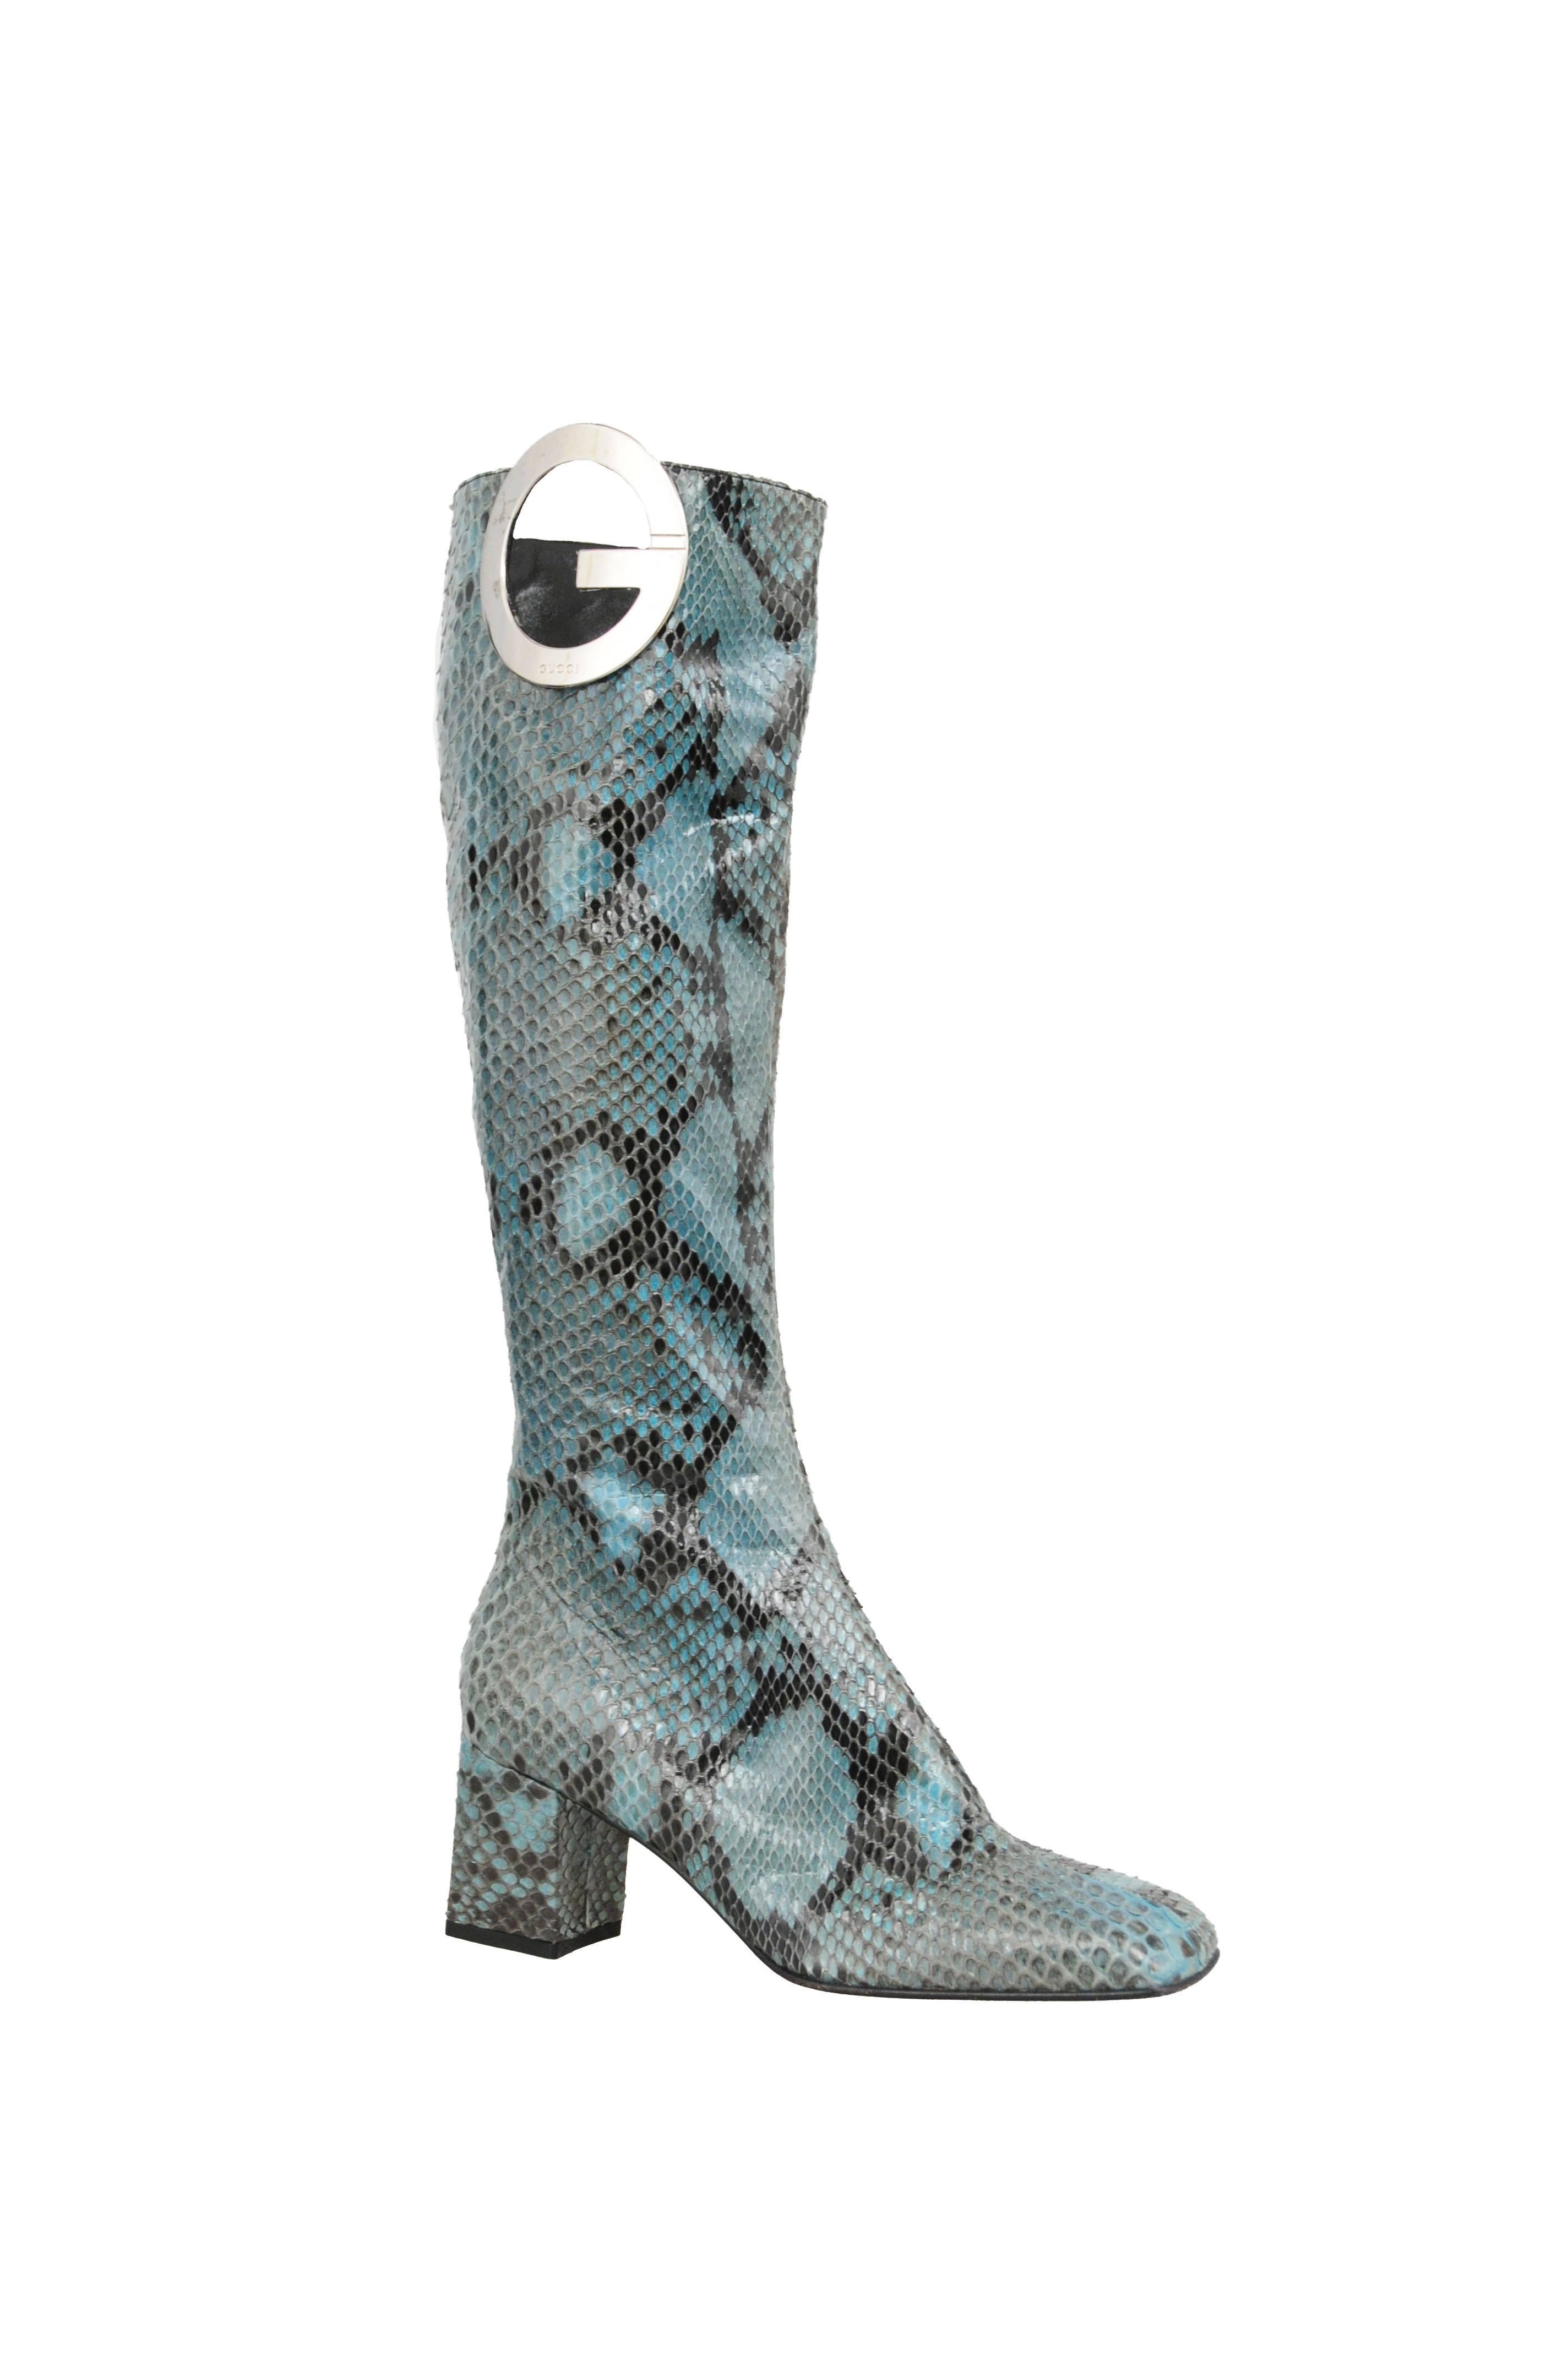 Vintage Tom Ford for Gucci teal snakeskin tall boots with silver logo detail. Zip closure at side. 
Please inquire for additional images.